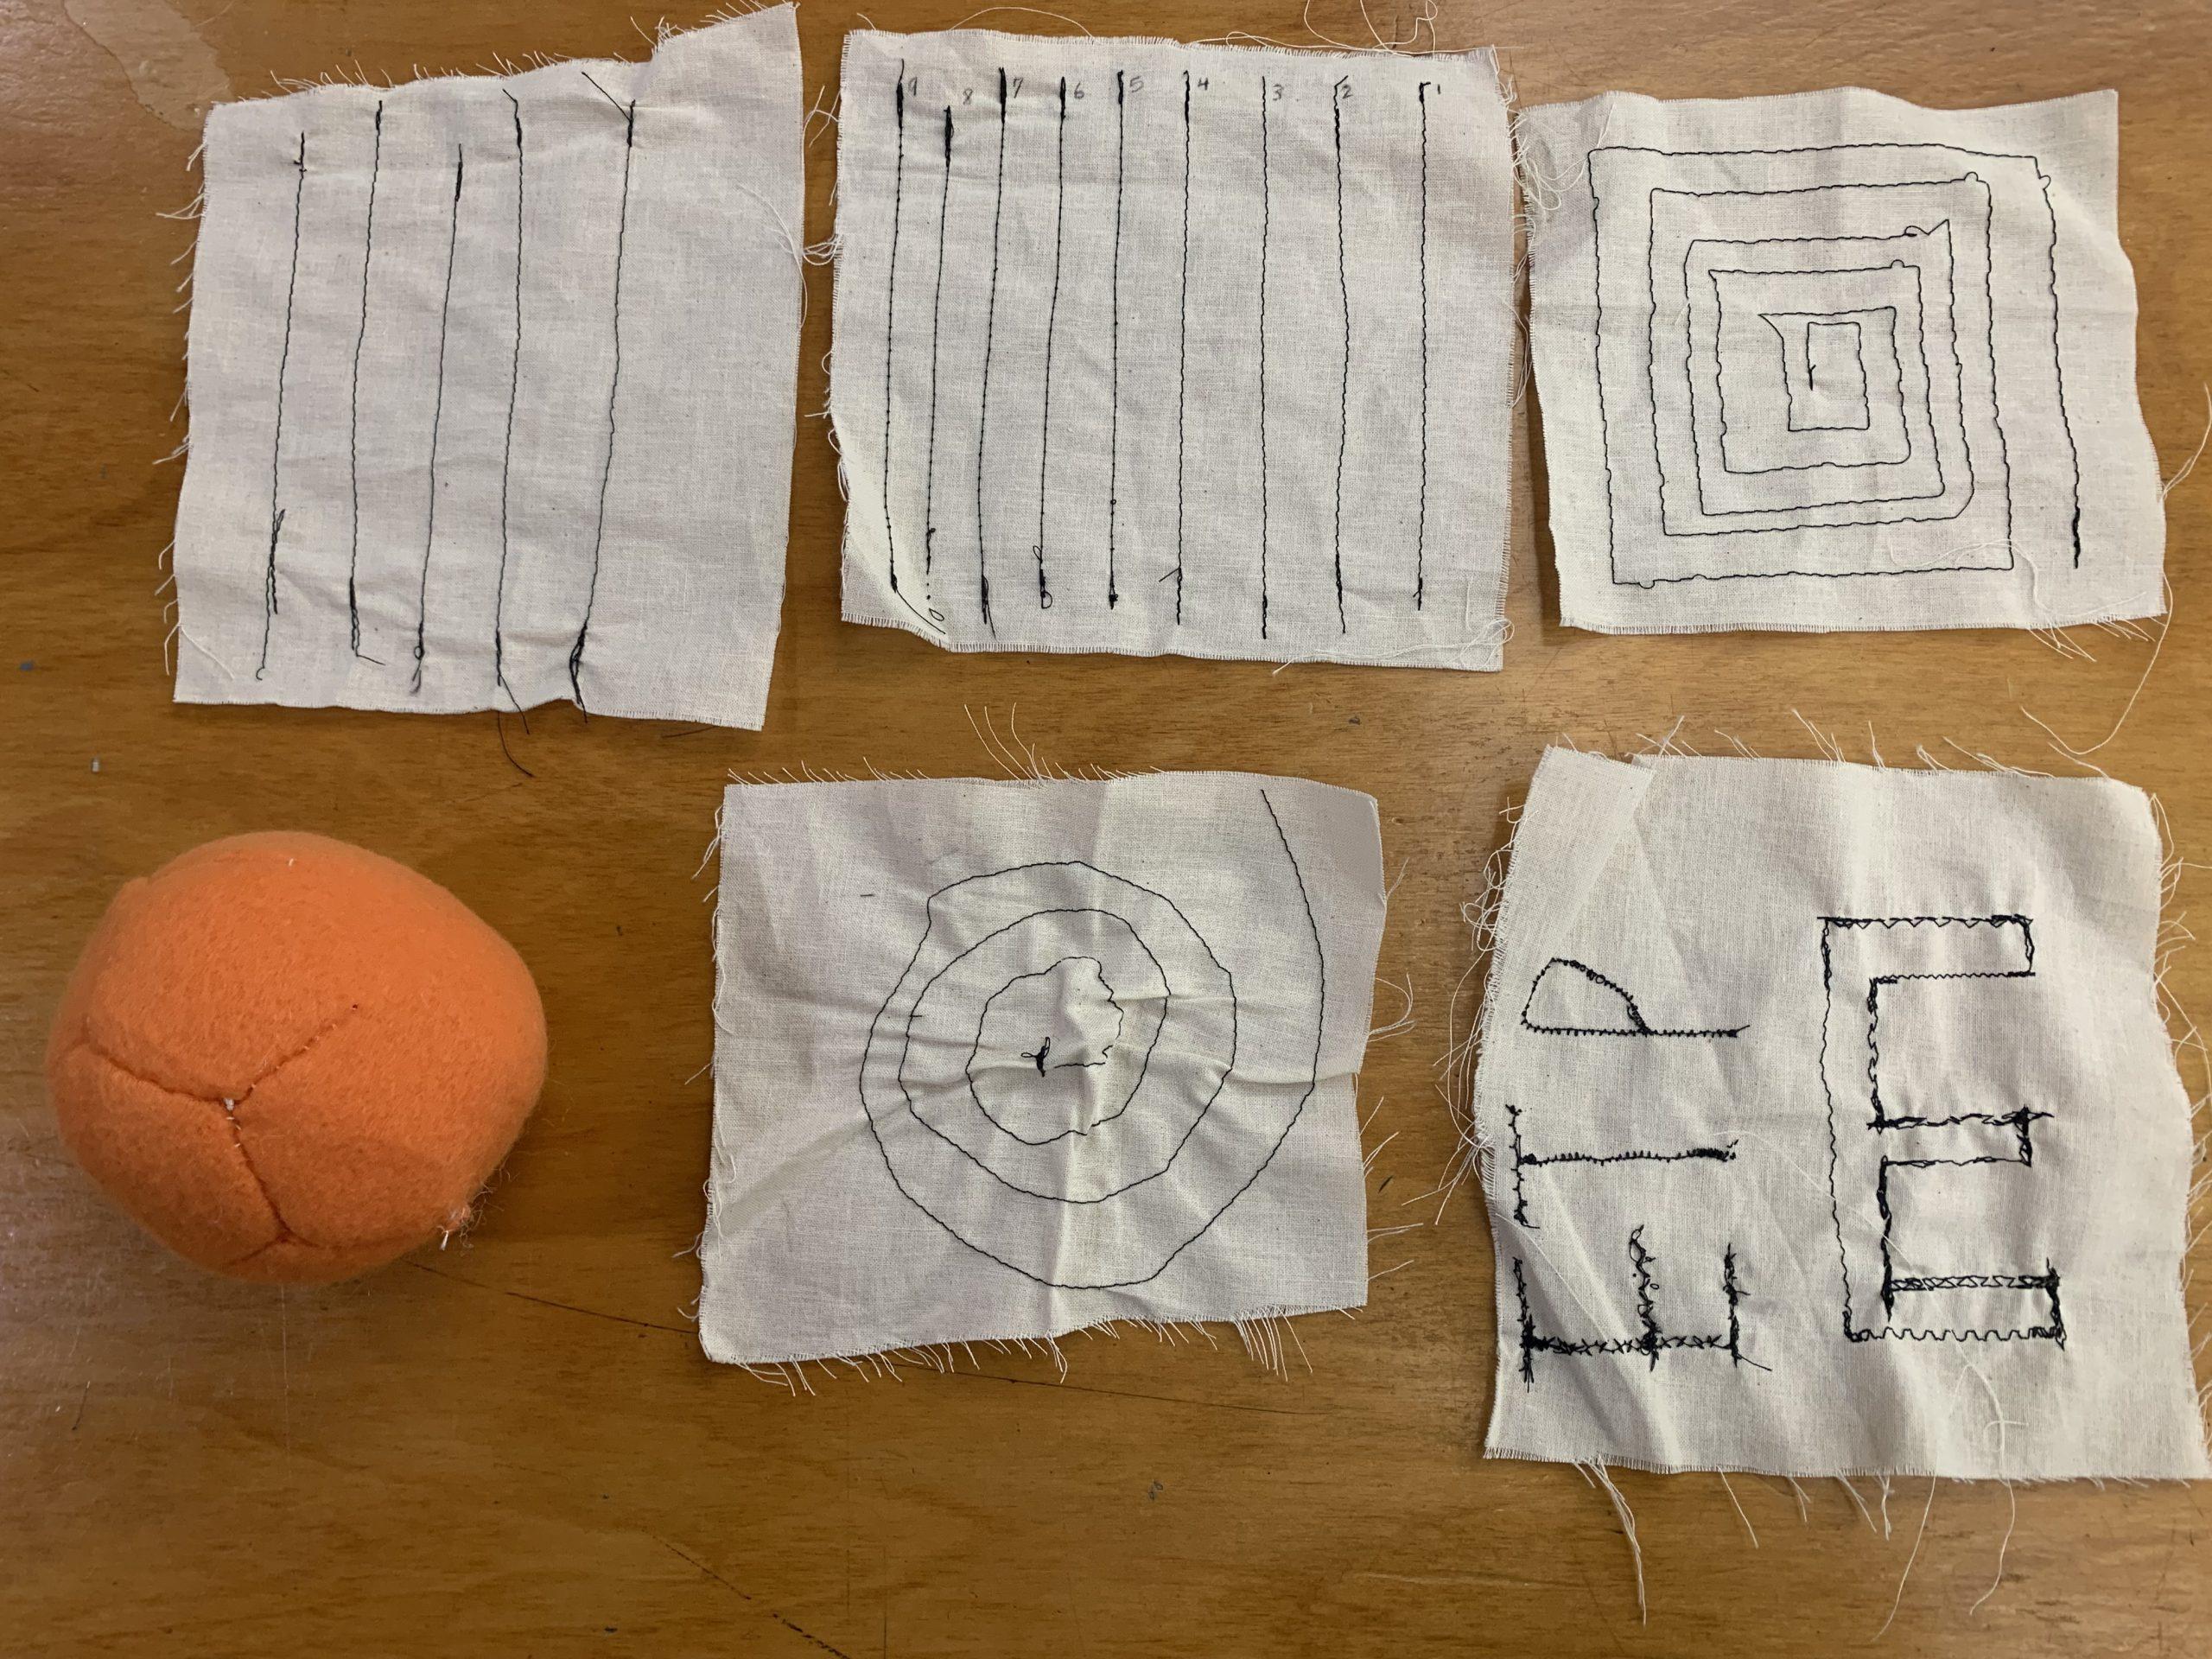 6 Sewing Samples: Straight Stitch, Tension Test, Square Spiral, Orange Ball, Spiral, Initials